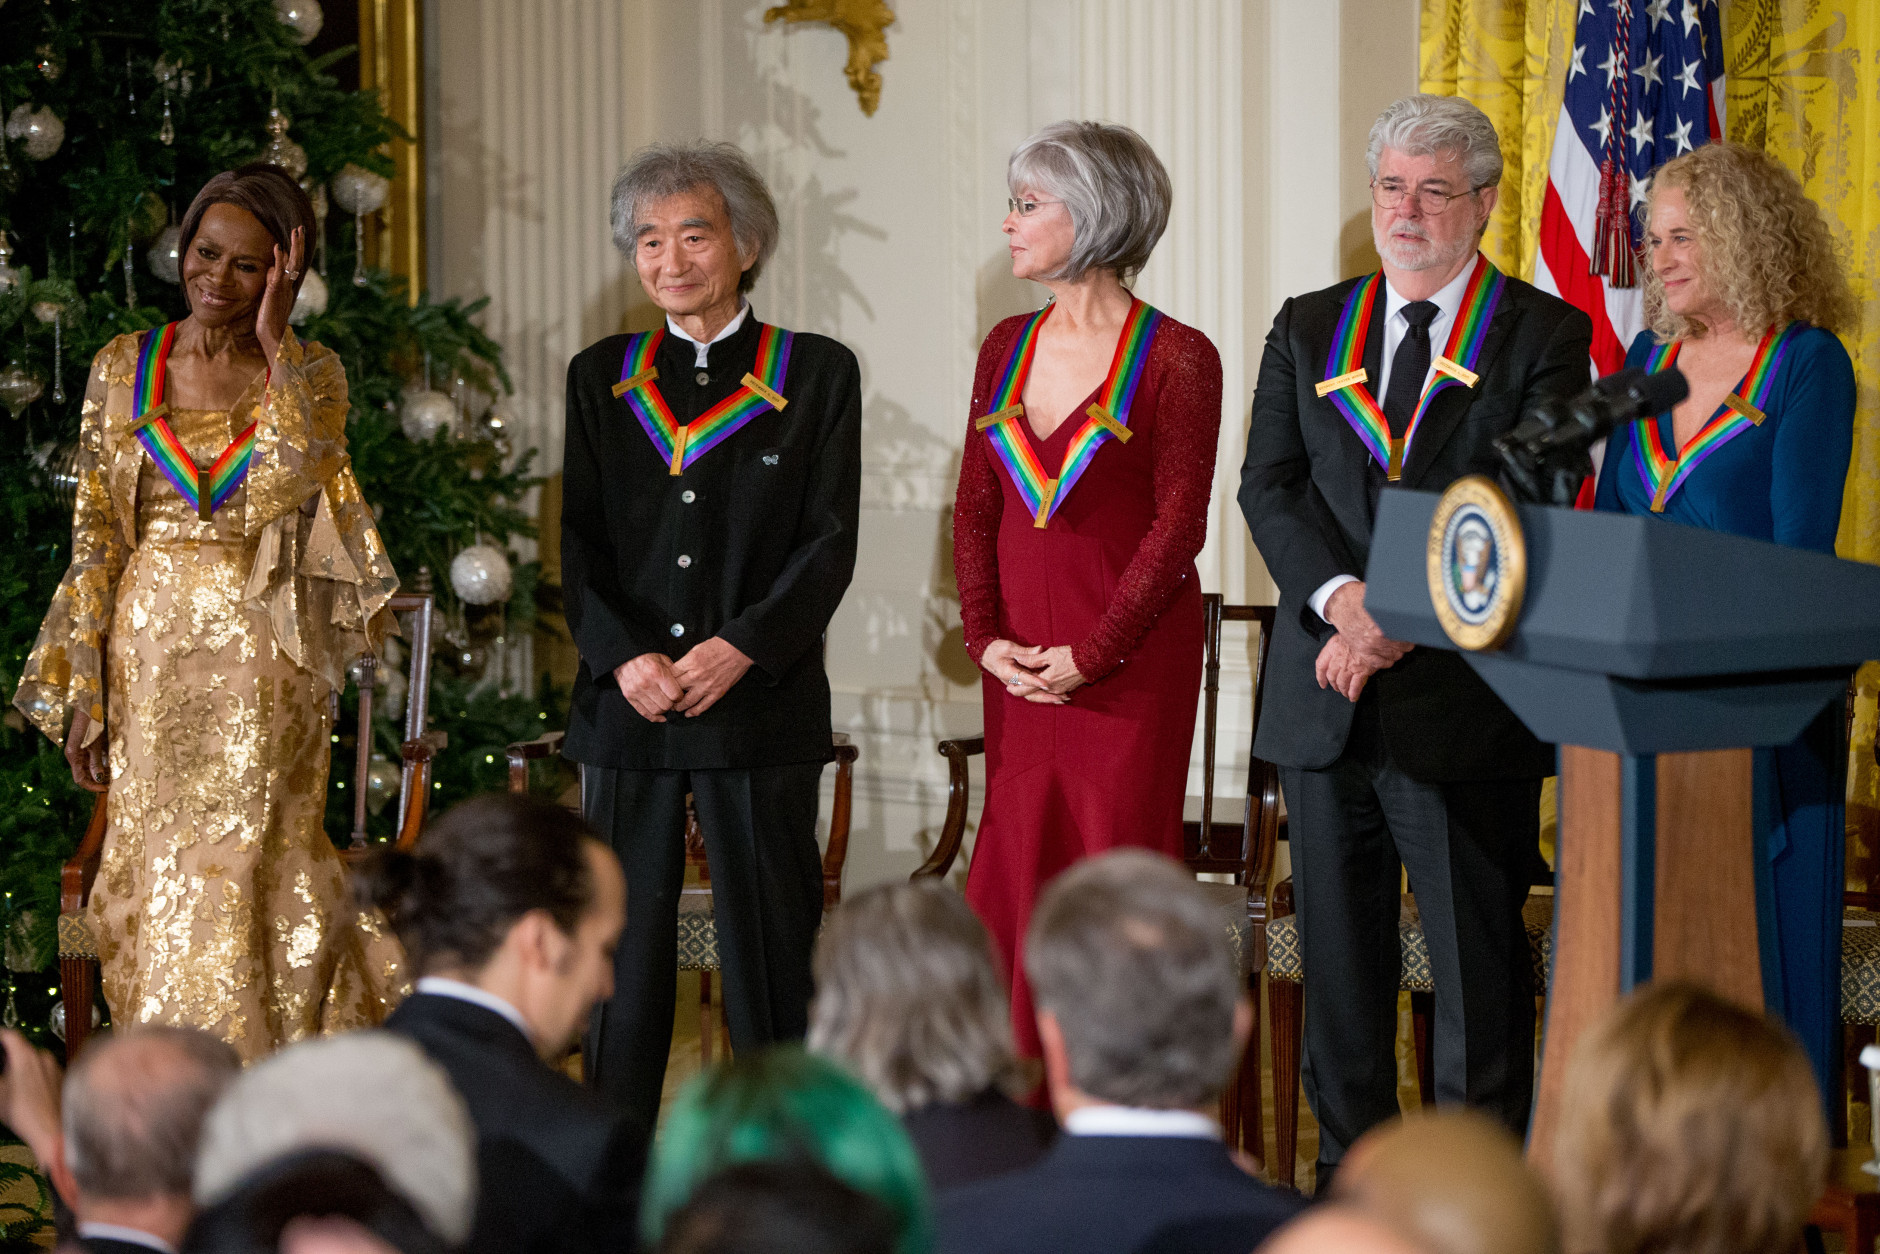 The 2015 Kennedy Center Honors Honorees, from left, actress Cicely Tyson, conductor Seiji Ozawa, actress and singer Rita Moreno, filmmaker George Lucas, and singer-songwriter Carole King stand on stage during a reception for them in the East Room of the White House, Sunday, Dec. 6, 2015, in Washington. (AP Photo/Andrew Harnik)